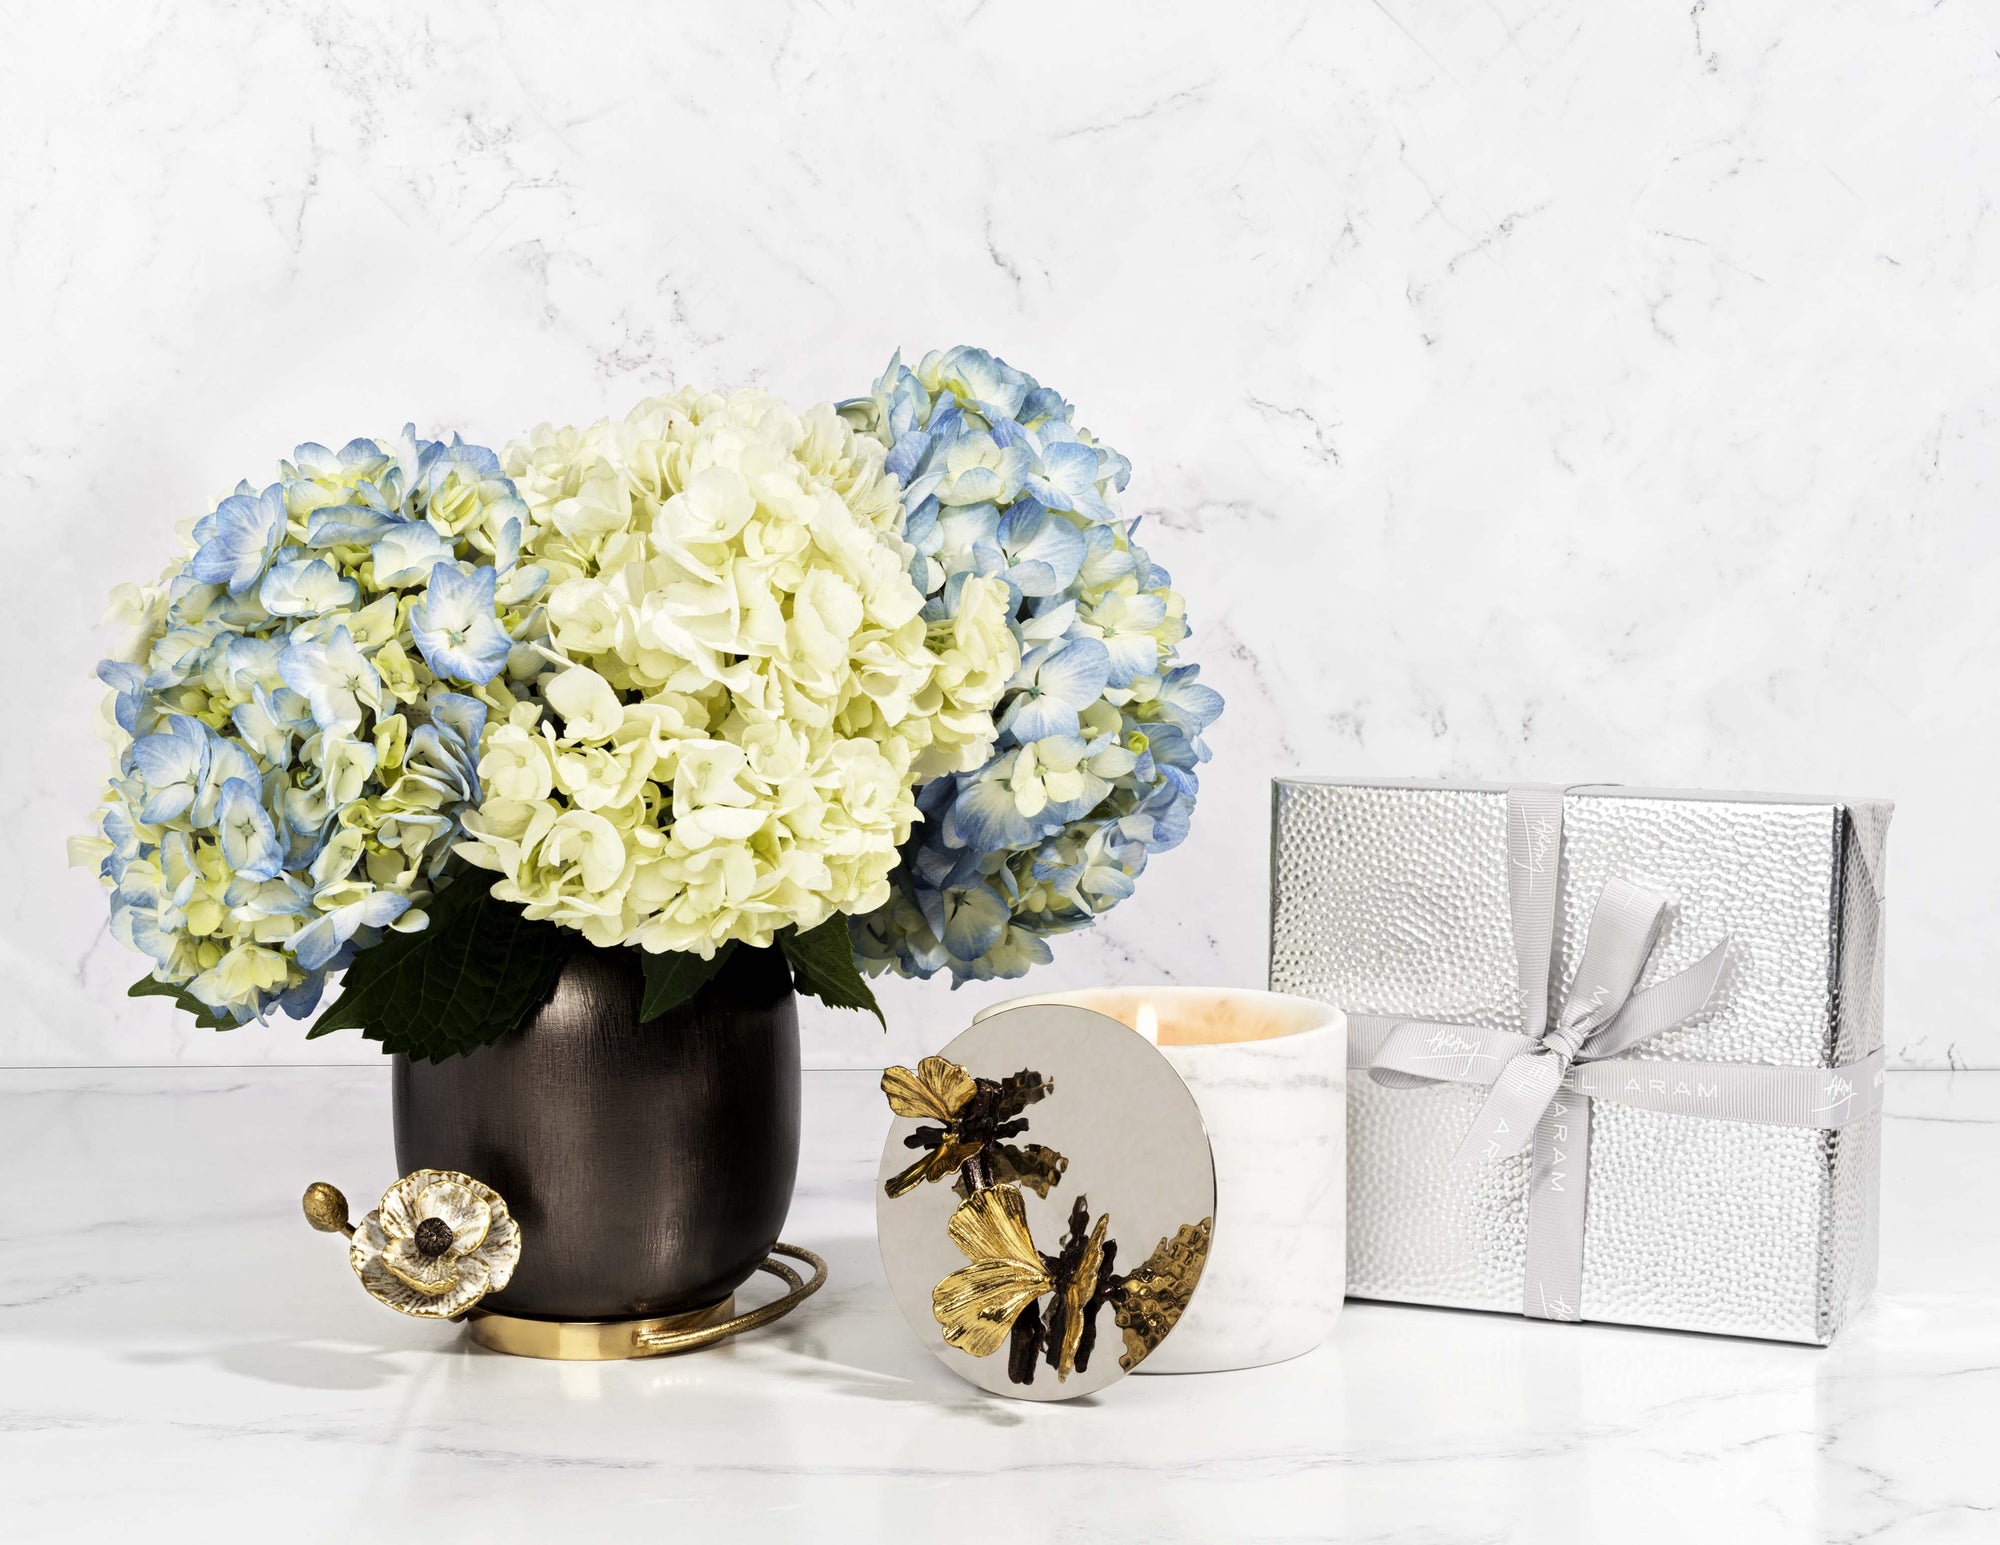 20 Thoughtful Mother's Day Gifts That Every Mom Will Love - Michael Aram